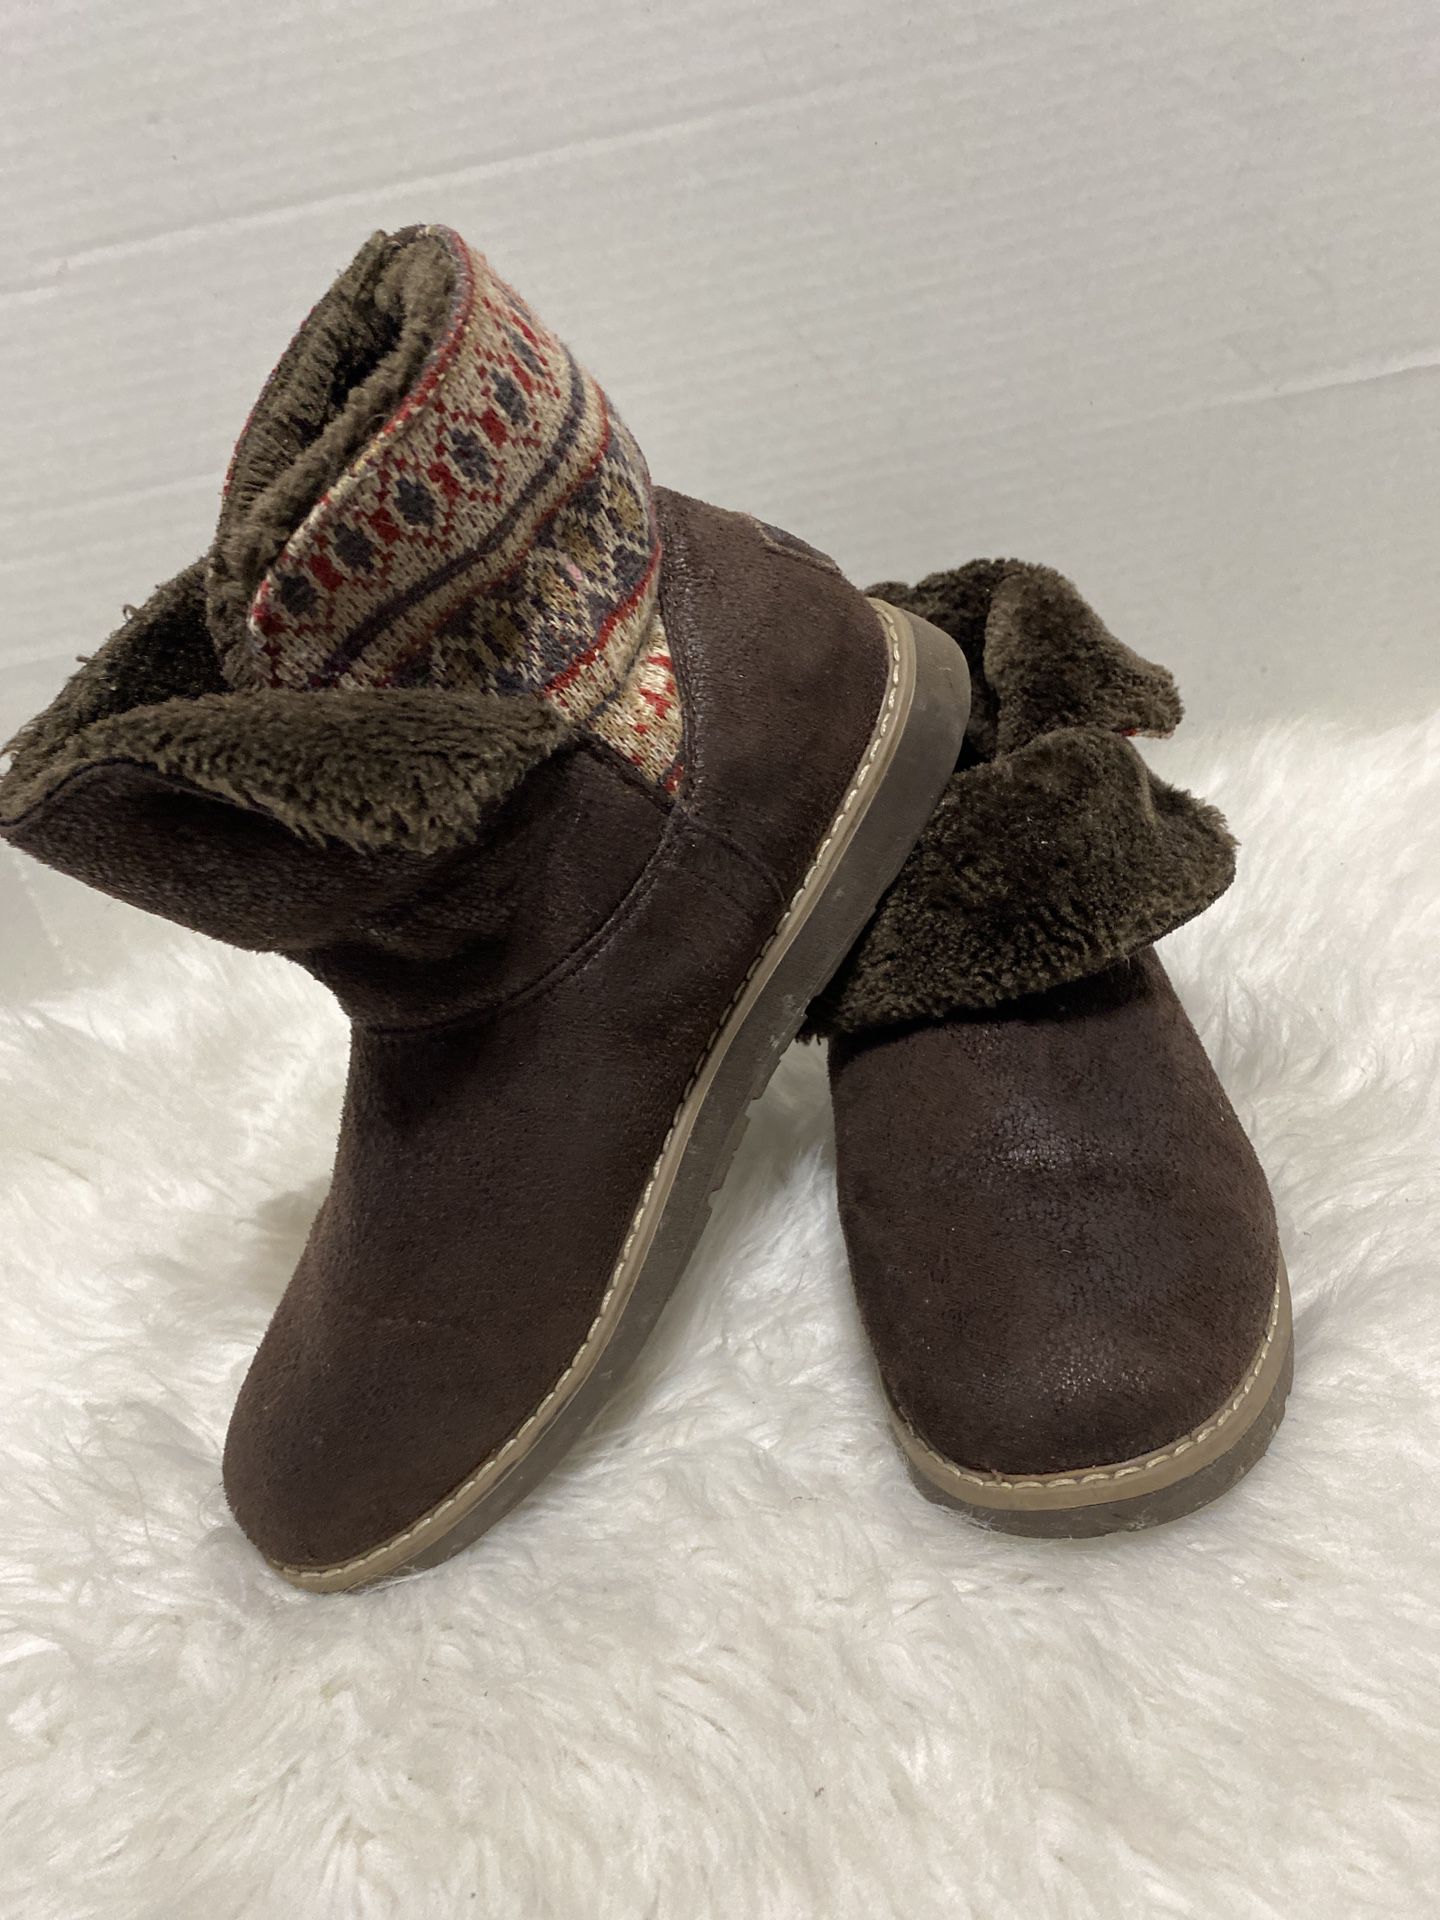 Skechers Bobs Womens 8 Alpine Snow Day Boots Brown Pull On Plush Foam Short Knit